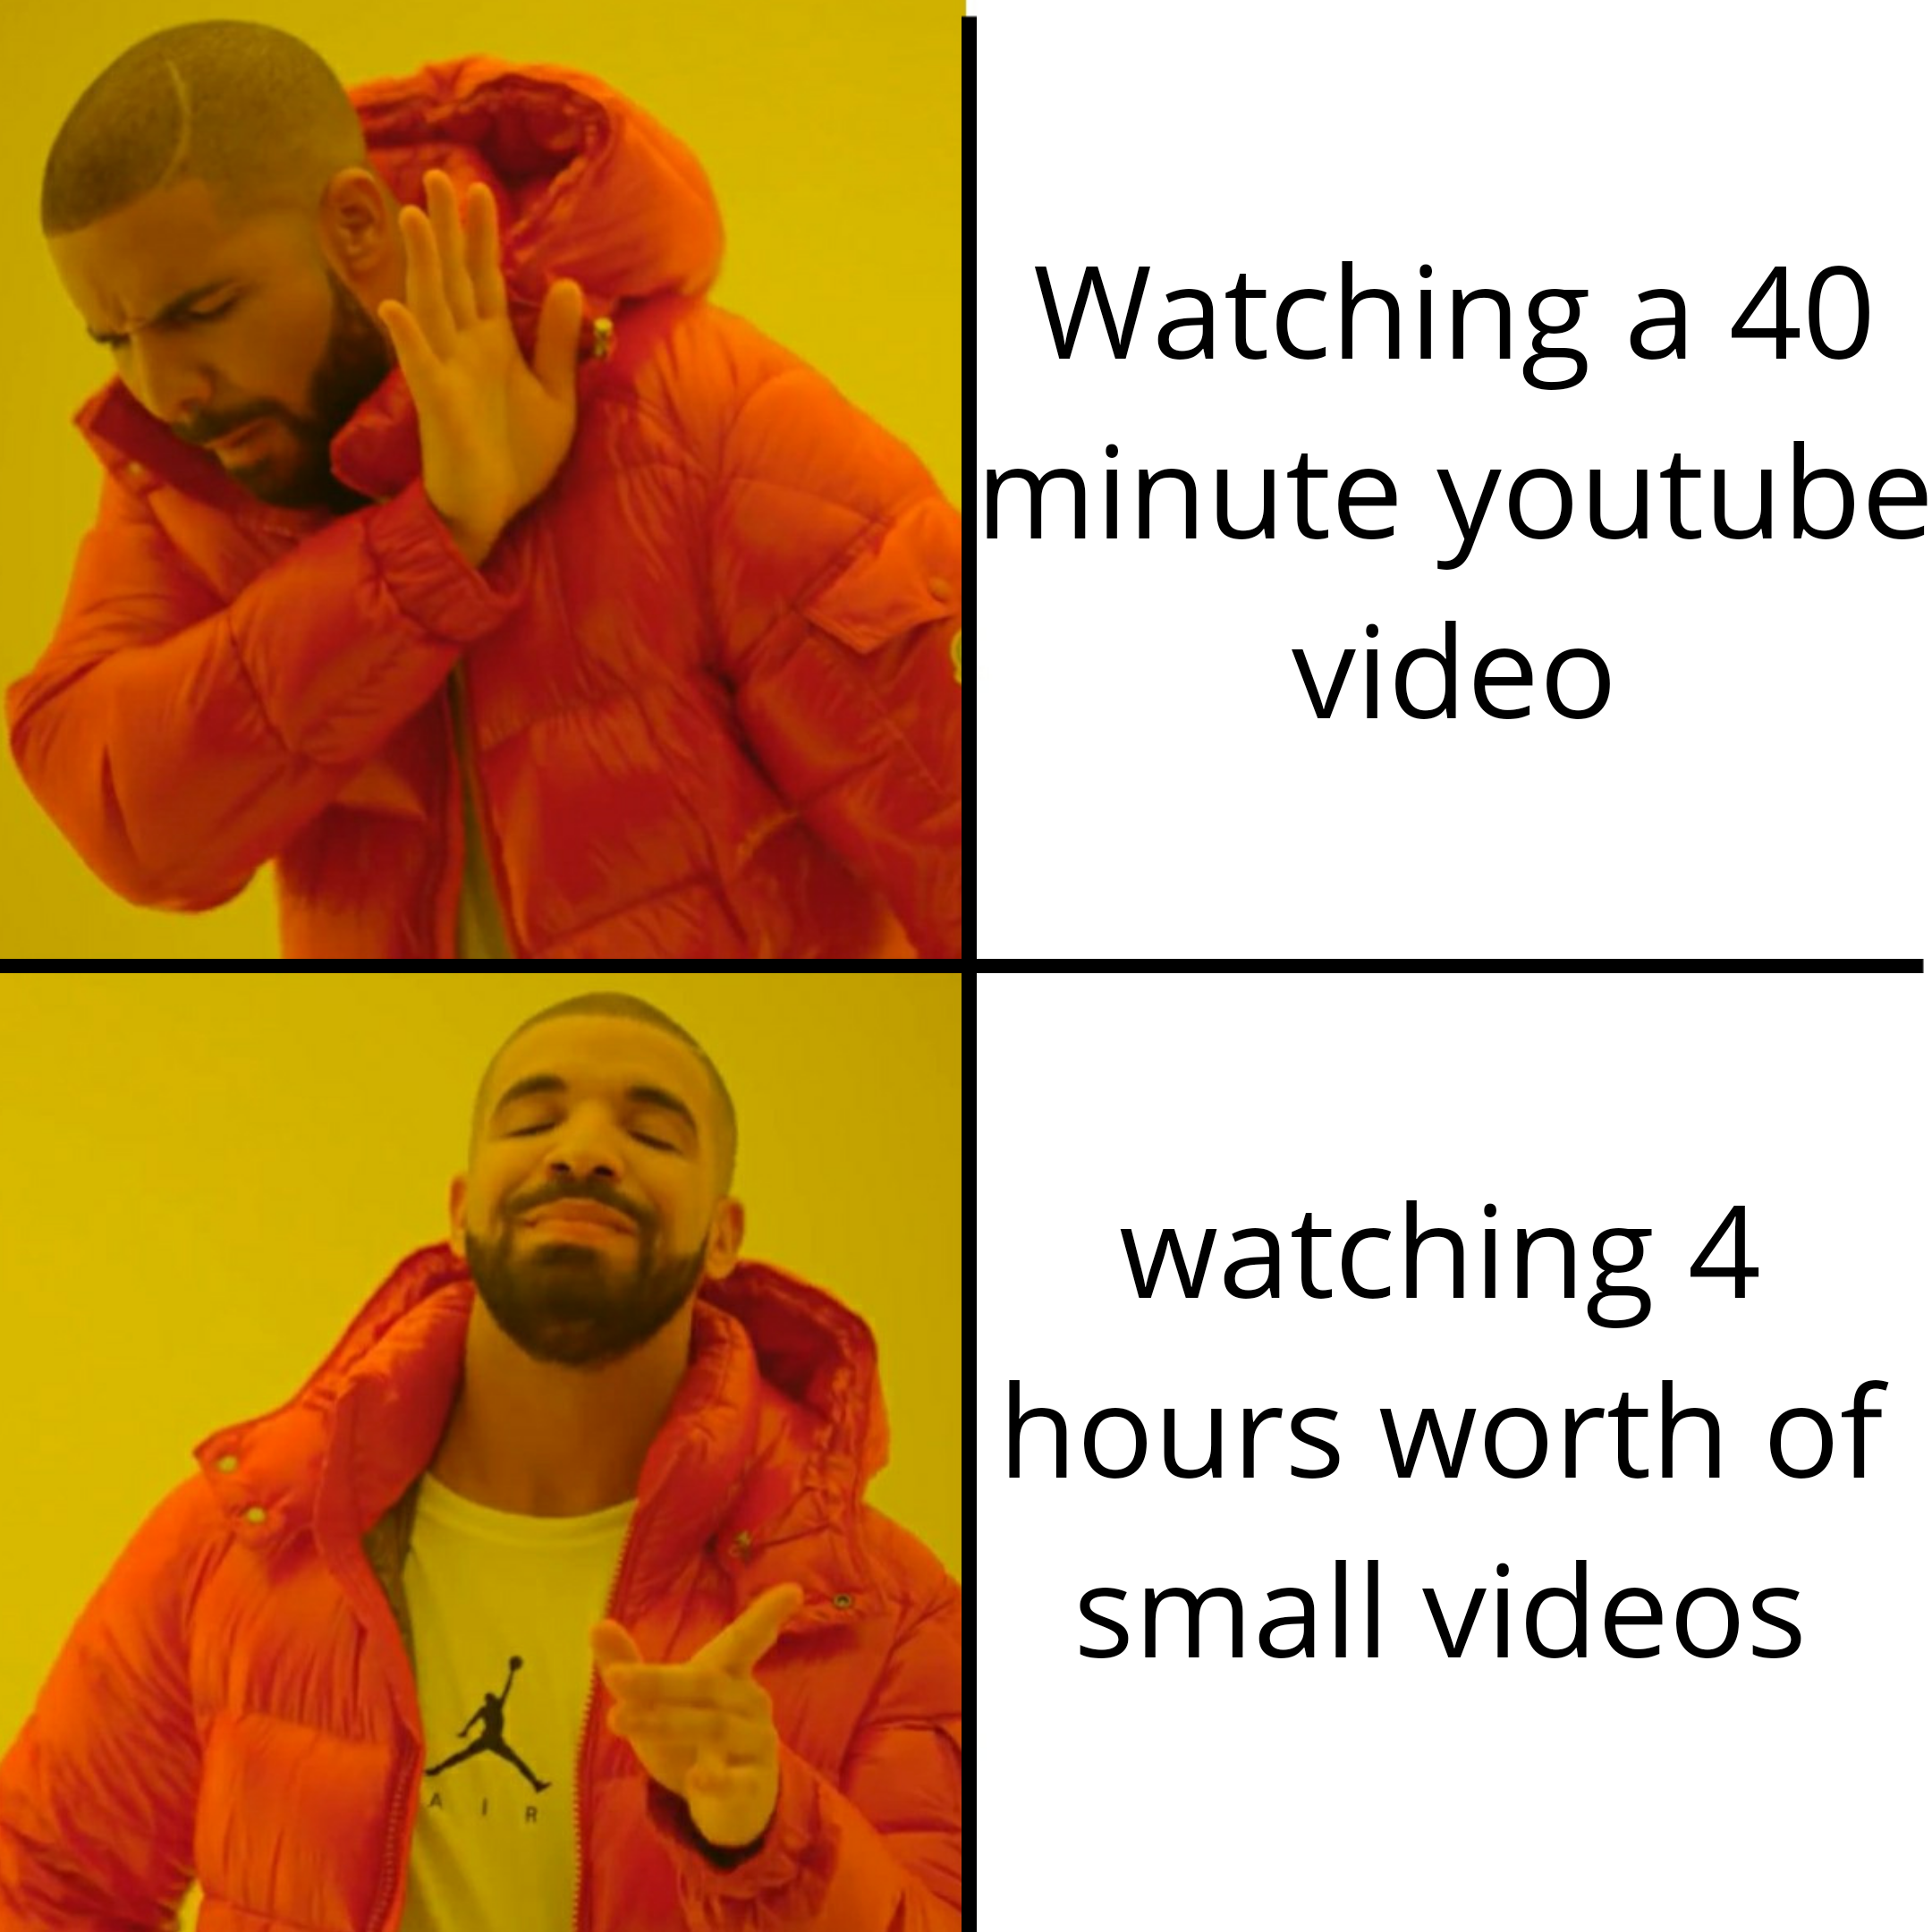 fresh memes - memetic hazards - Watching a 40 minute youtube video watching 4 hours worth of small videos